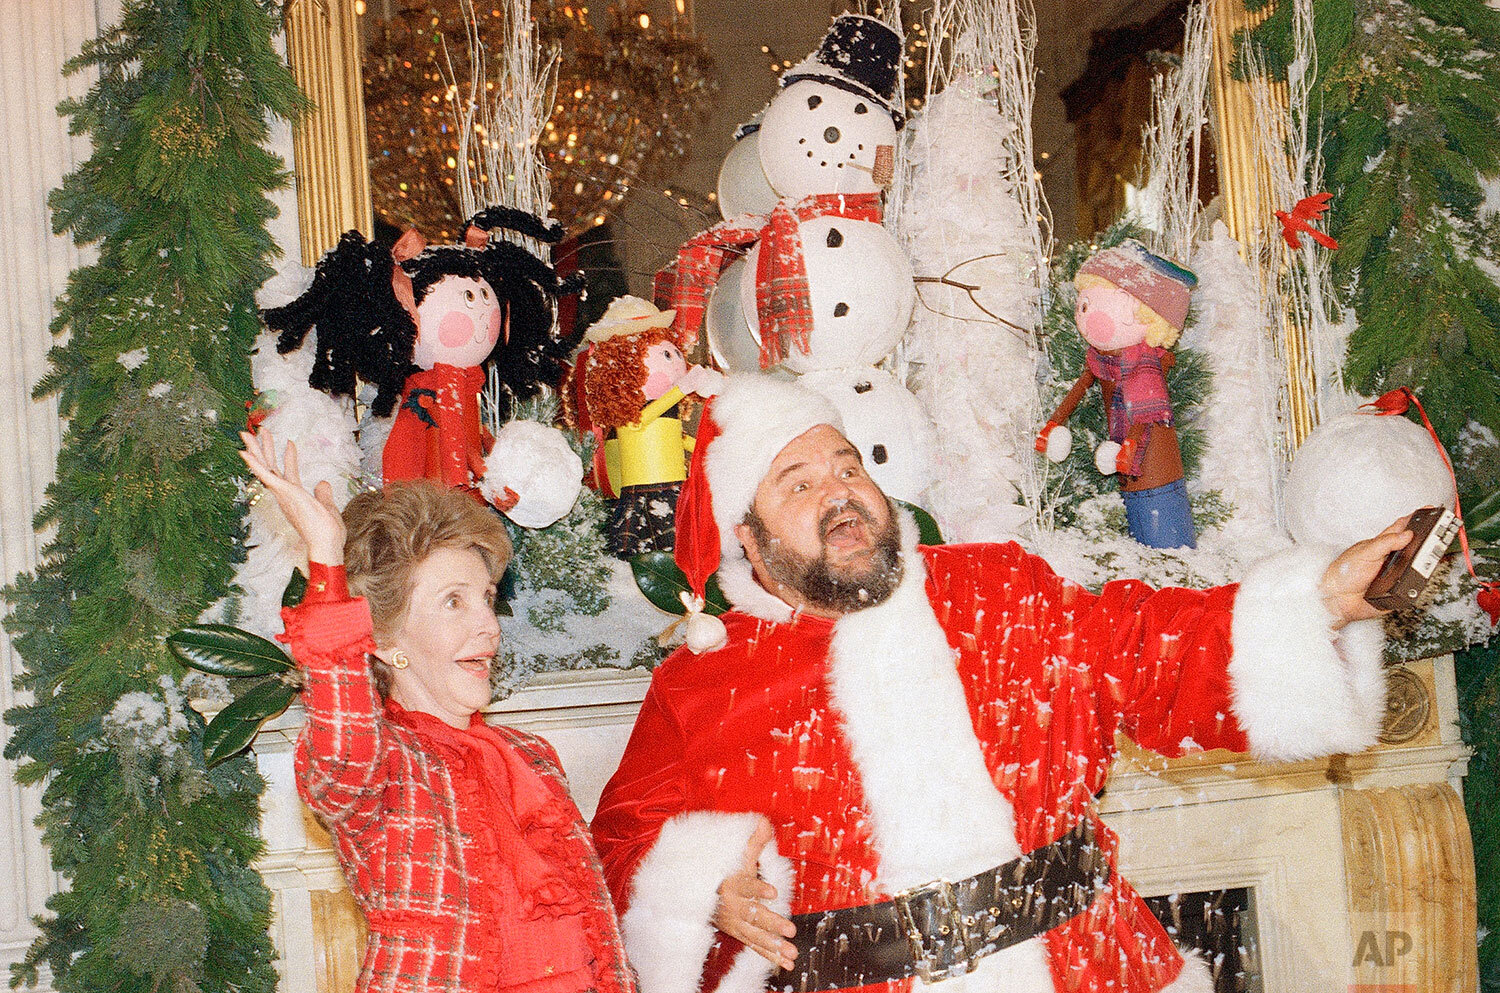  First Lady Nancy Reagan, left, and Santa, Dom DeLuise, throw some artificial snow in the air during a press preview of White House decorations, Monday, Dec. 14, 1987, Washington, D.C. (AP Photo/Barry Thumma) 